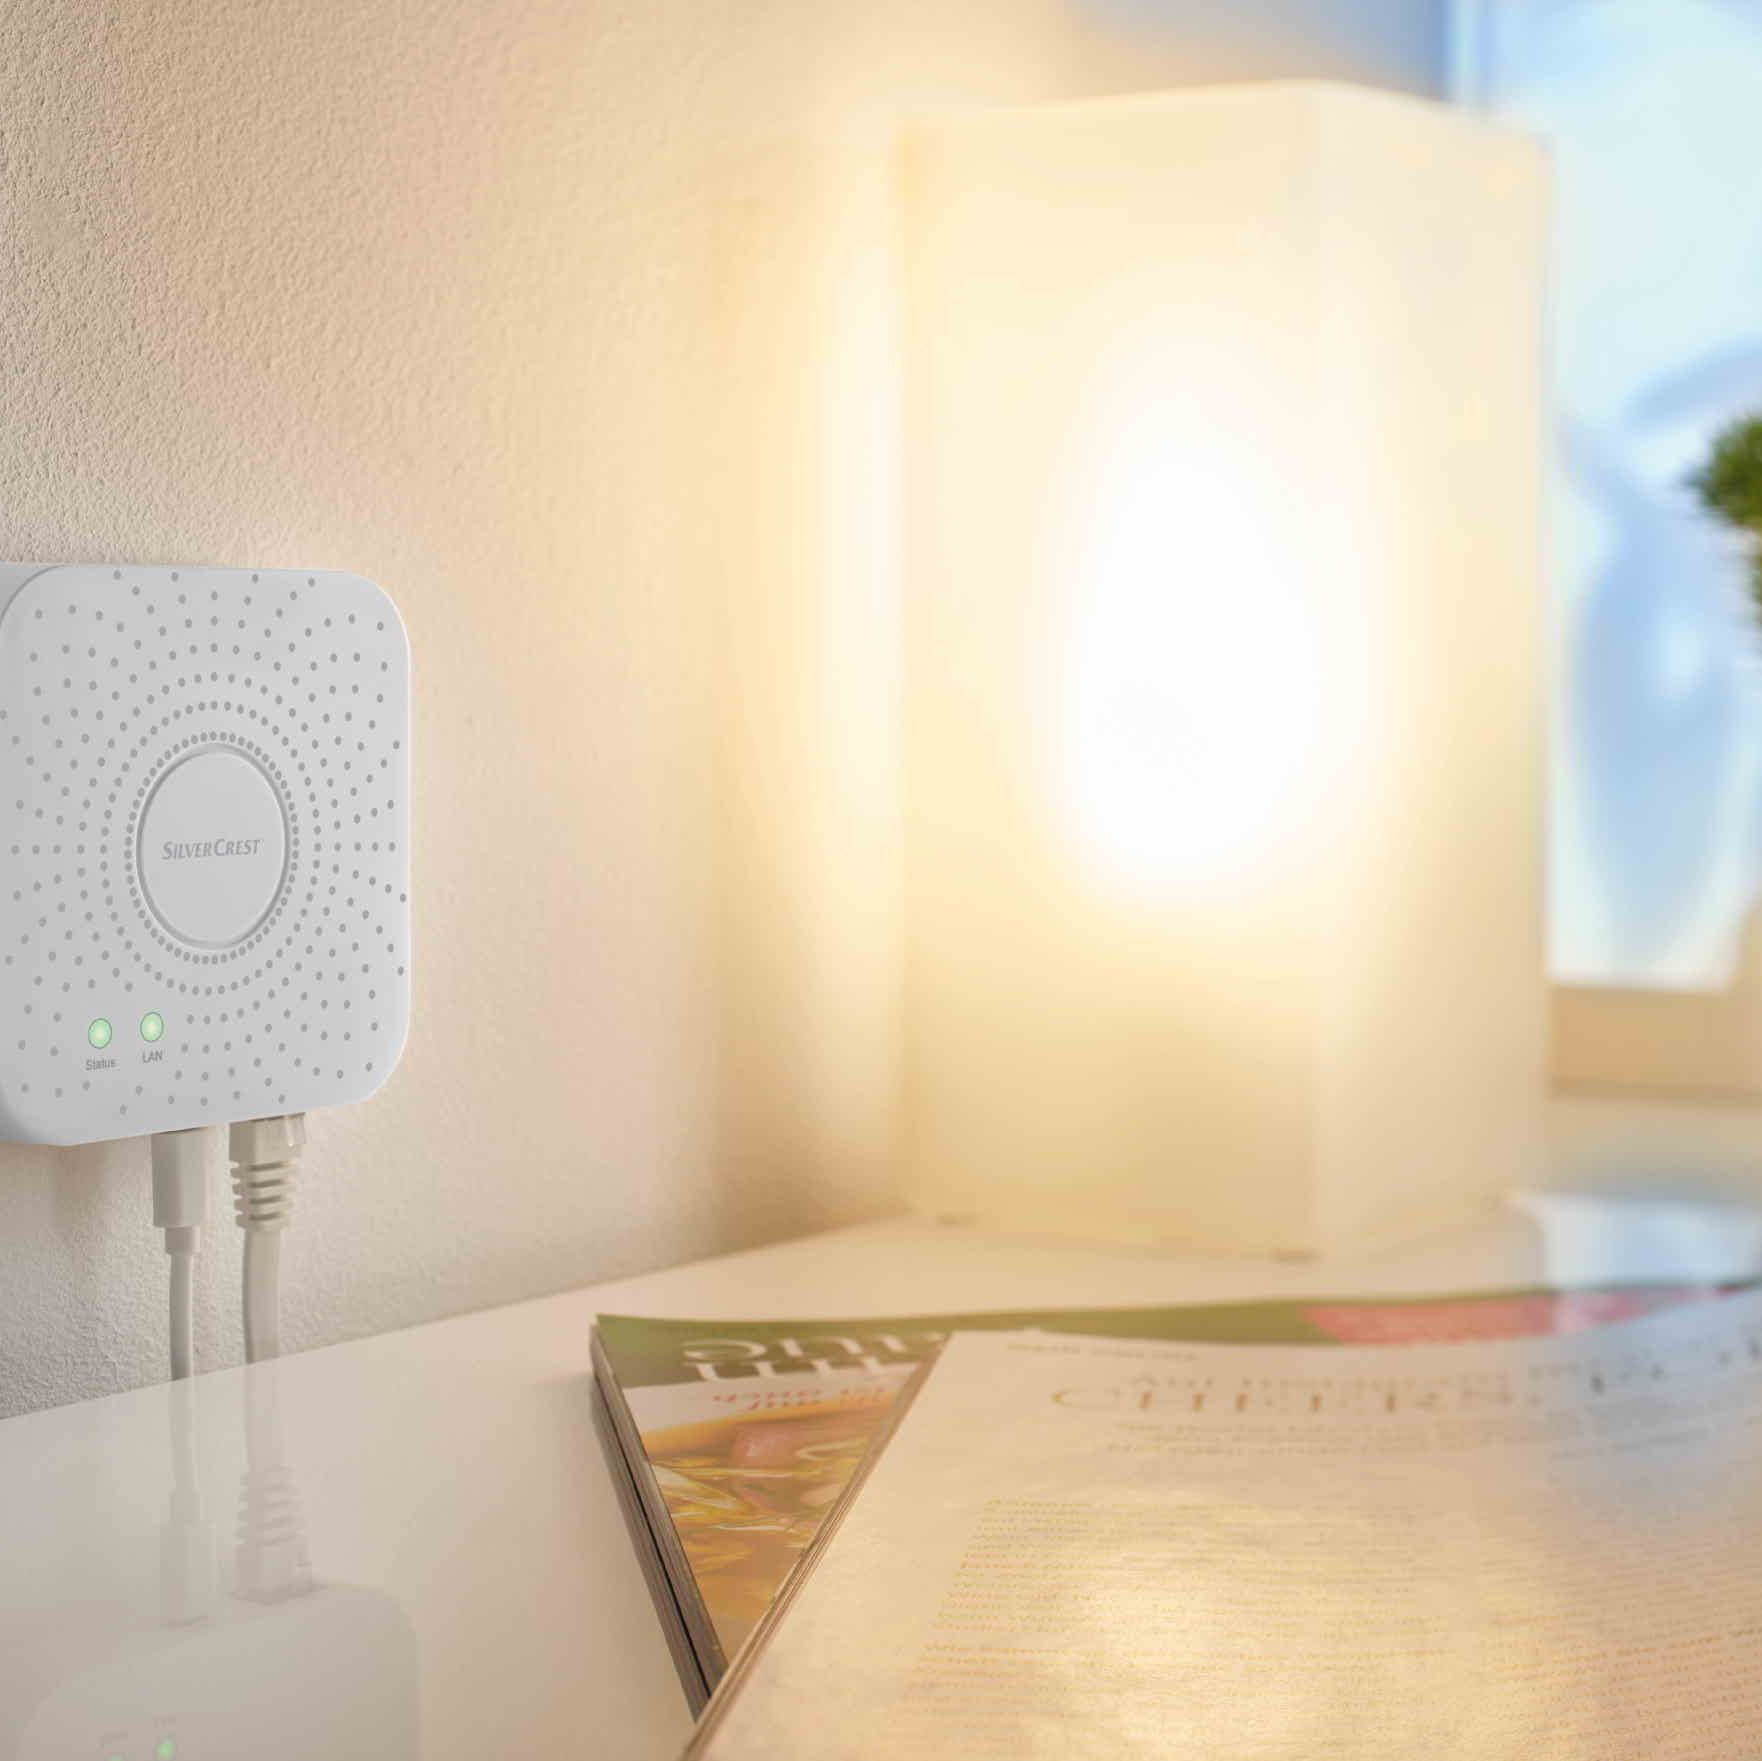 Lidl\'s Smart Home Range Lidl Starts Just £7.99 - Offers From